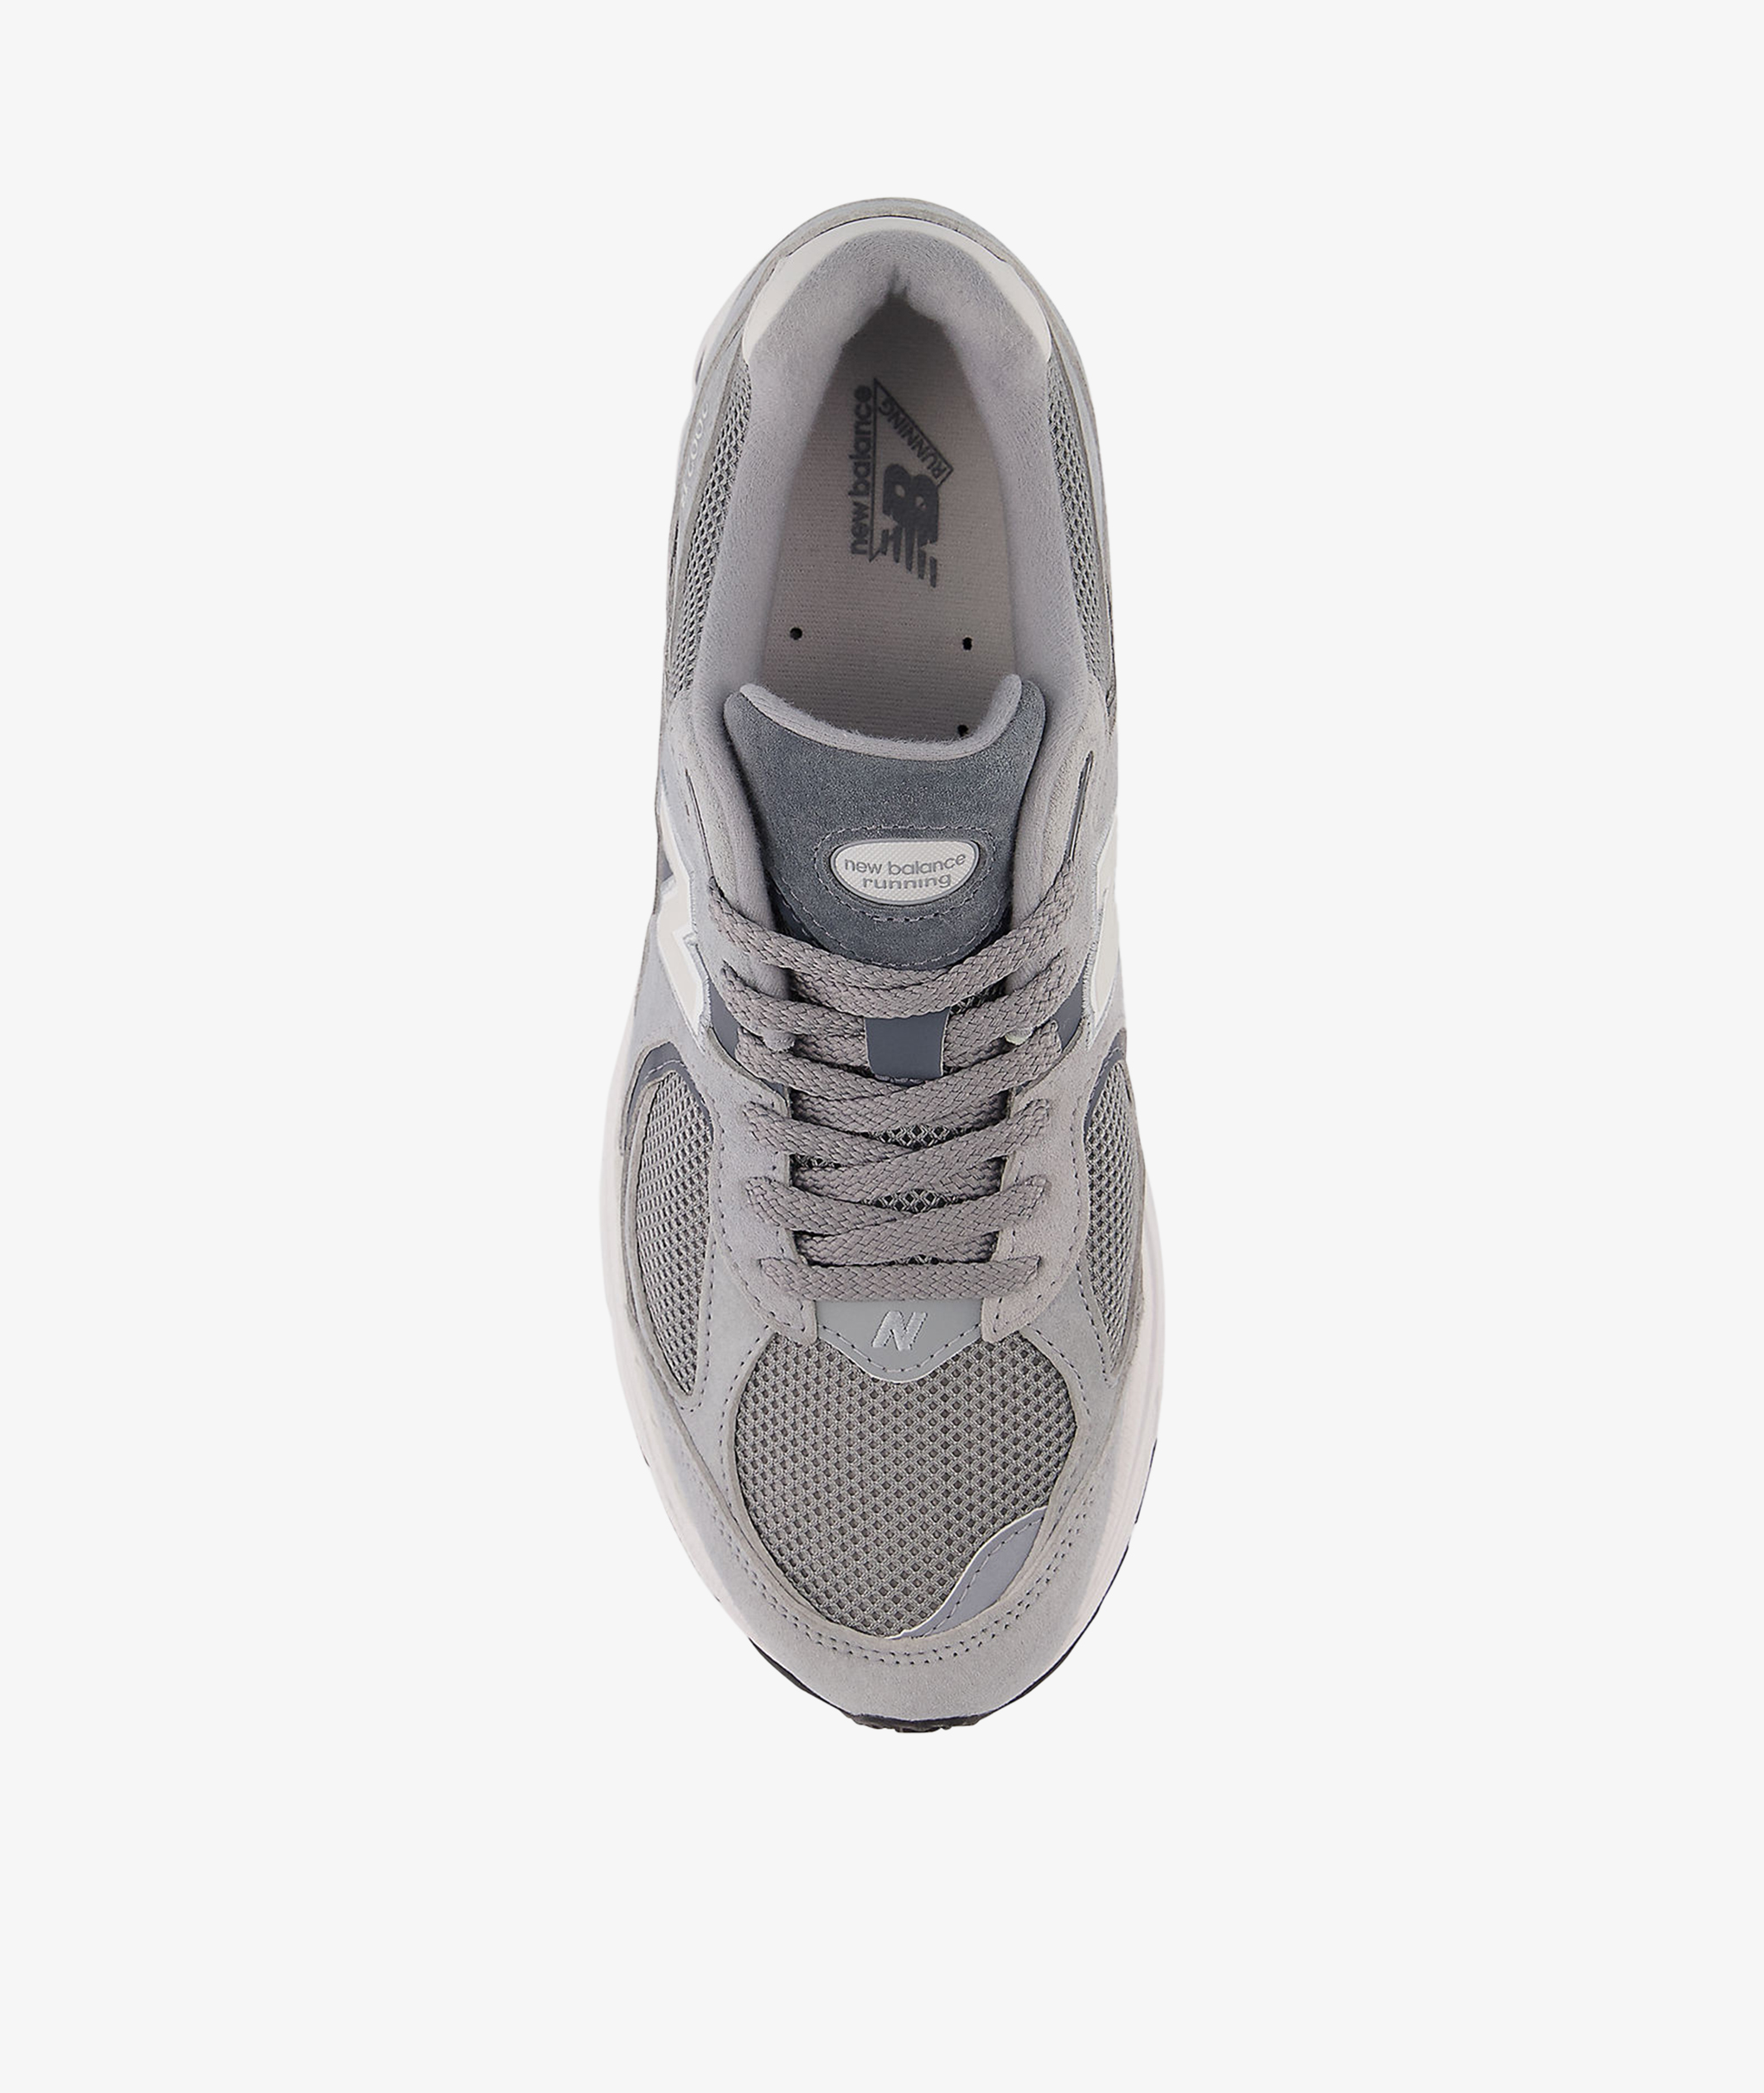 Norse Store | Shipping Worldwide - New Balance M2002RST - STEEL/LEAD